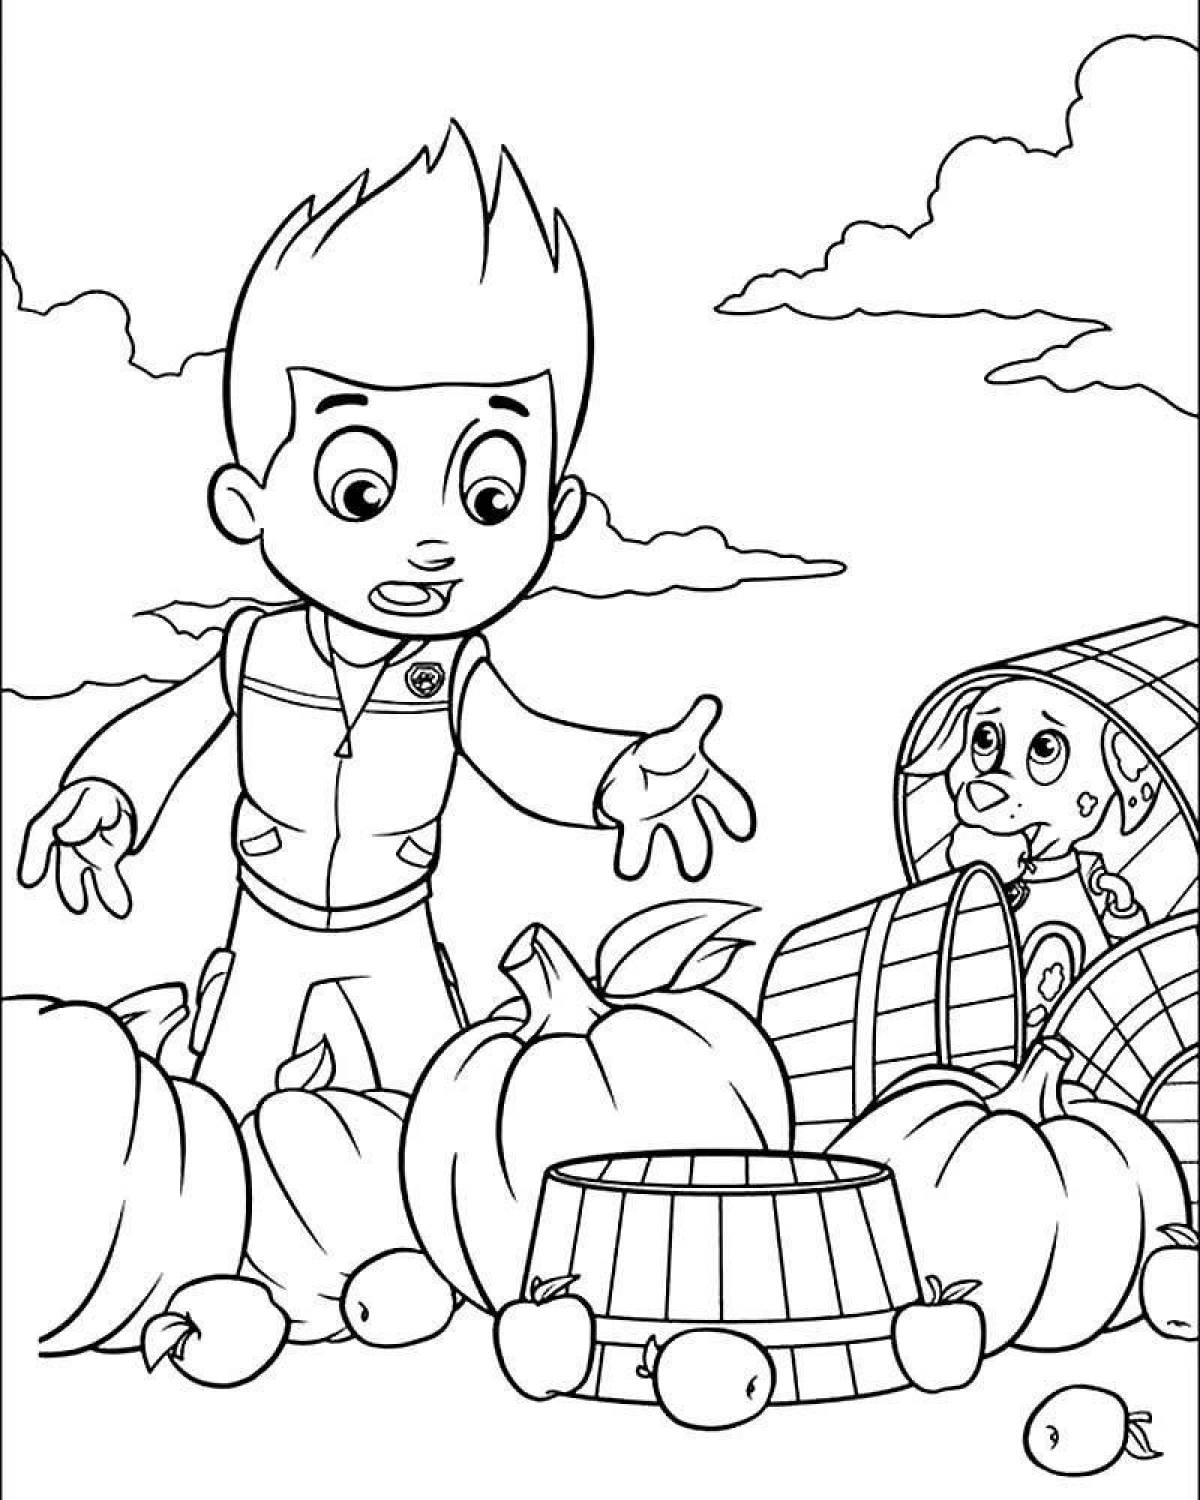 Dazzling rider coloring page